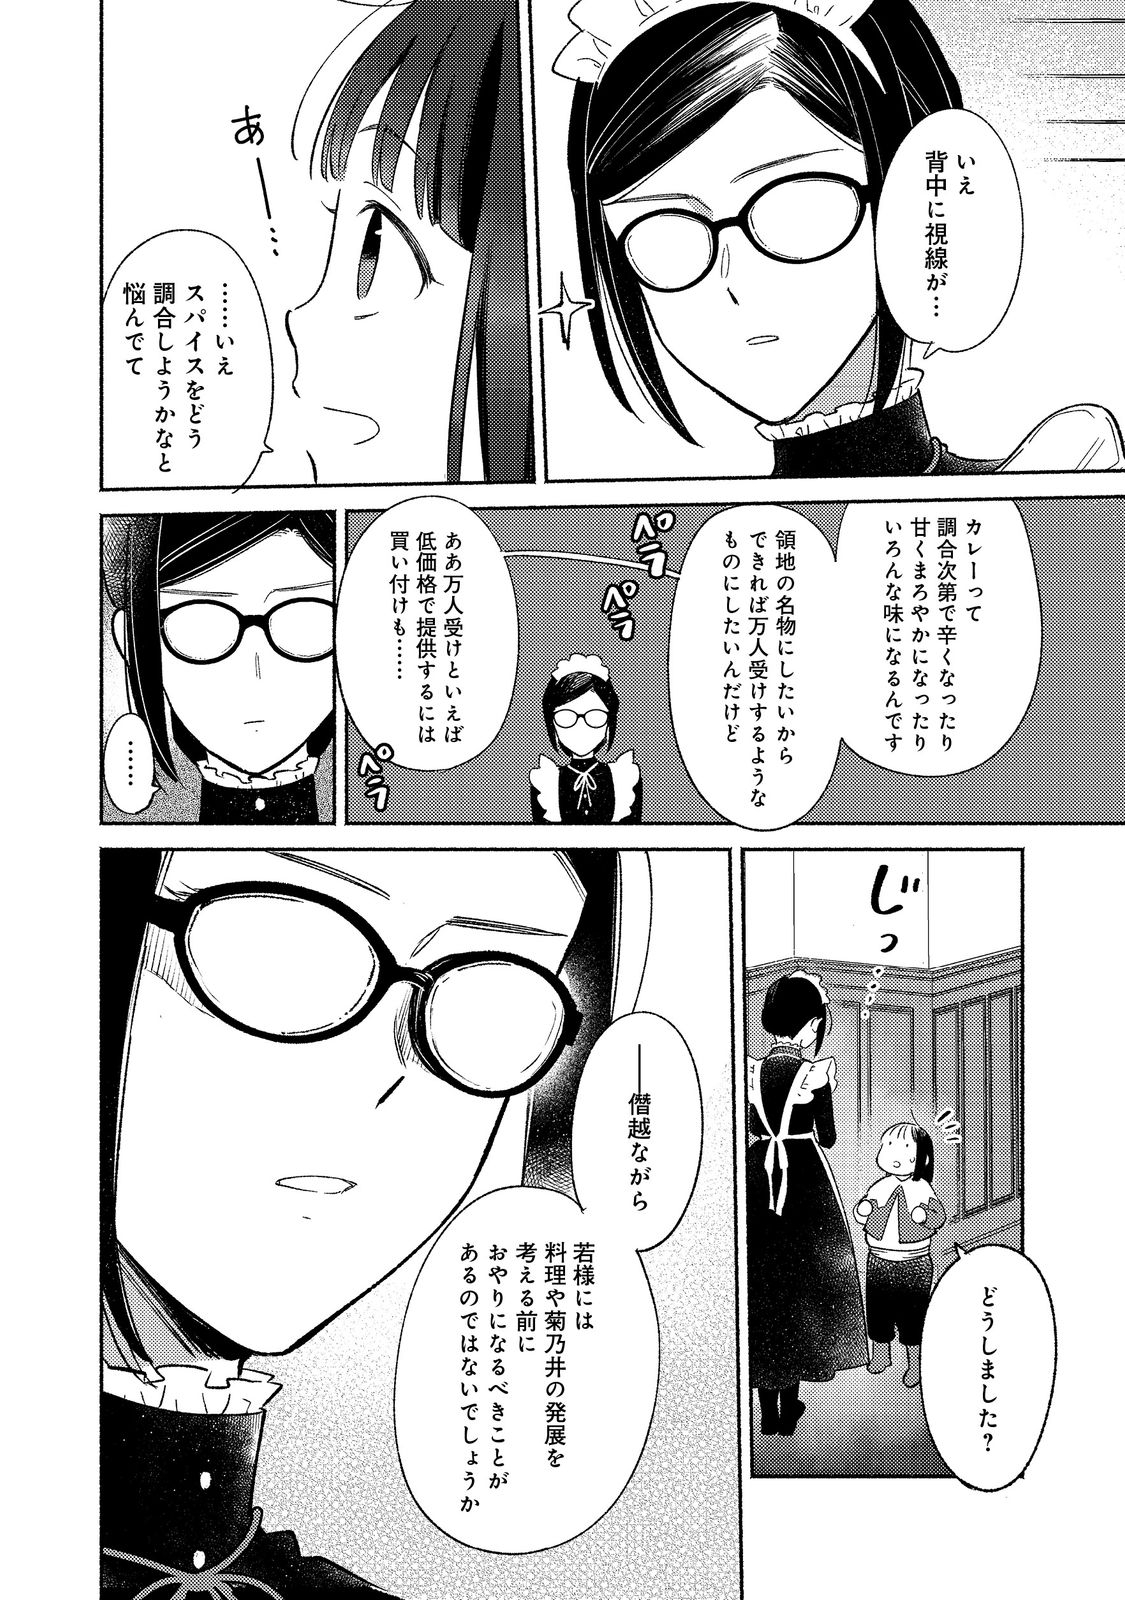 I’m the White Pig Nobleman 第16.2話 - Page 8